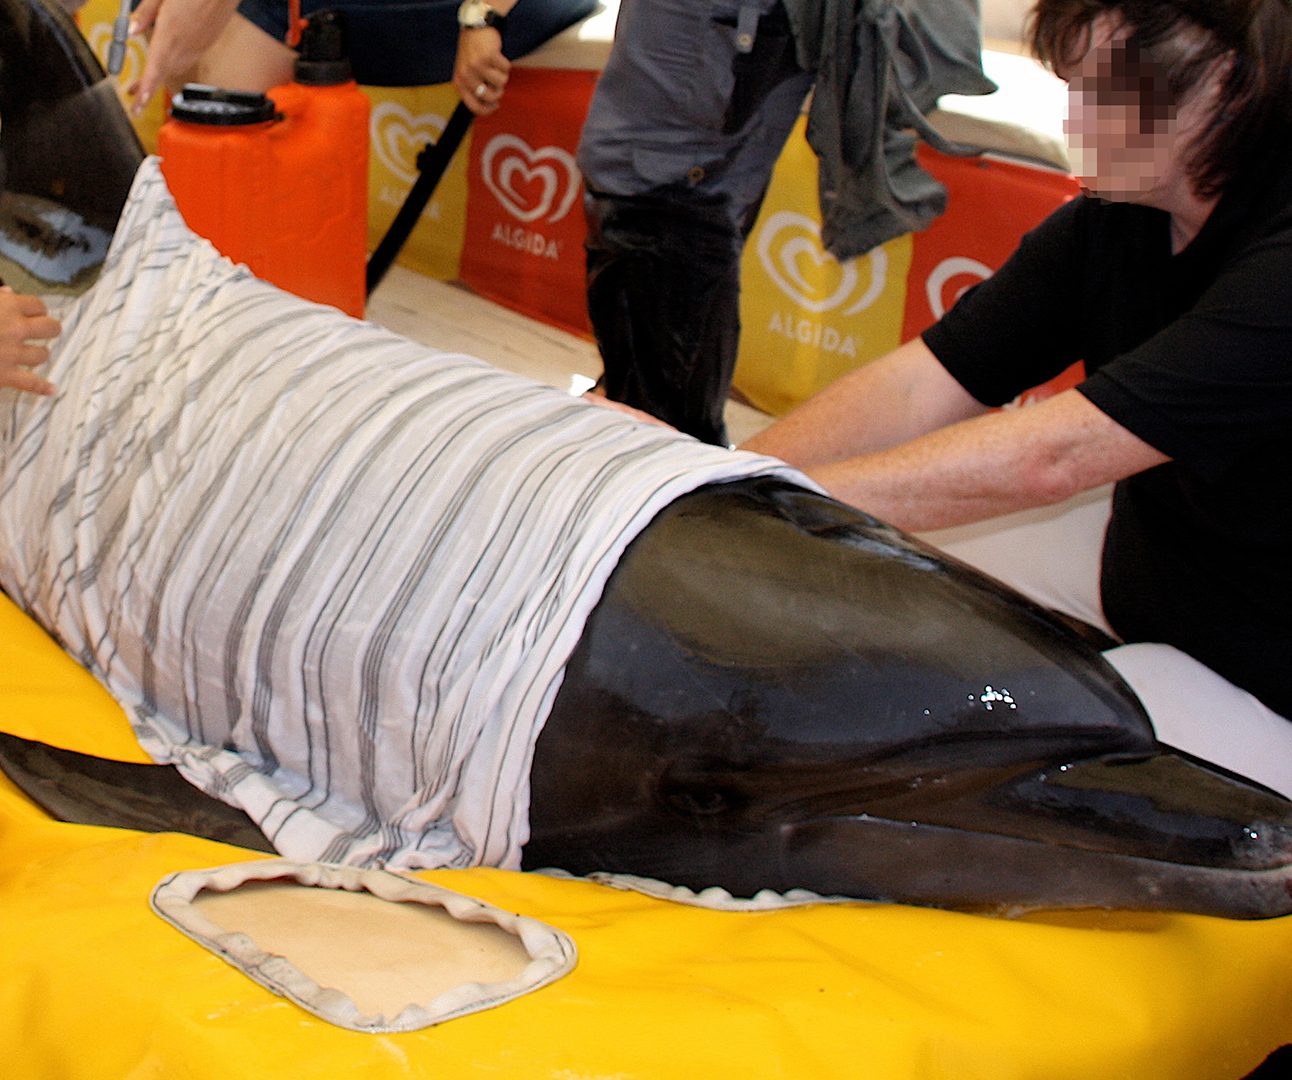 A dolphin is on a yellow mat wrapped in a wet towel while people surround it it